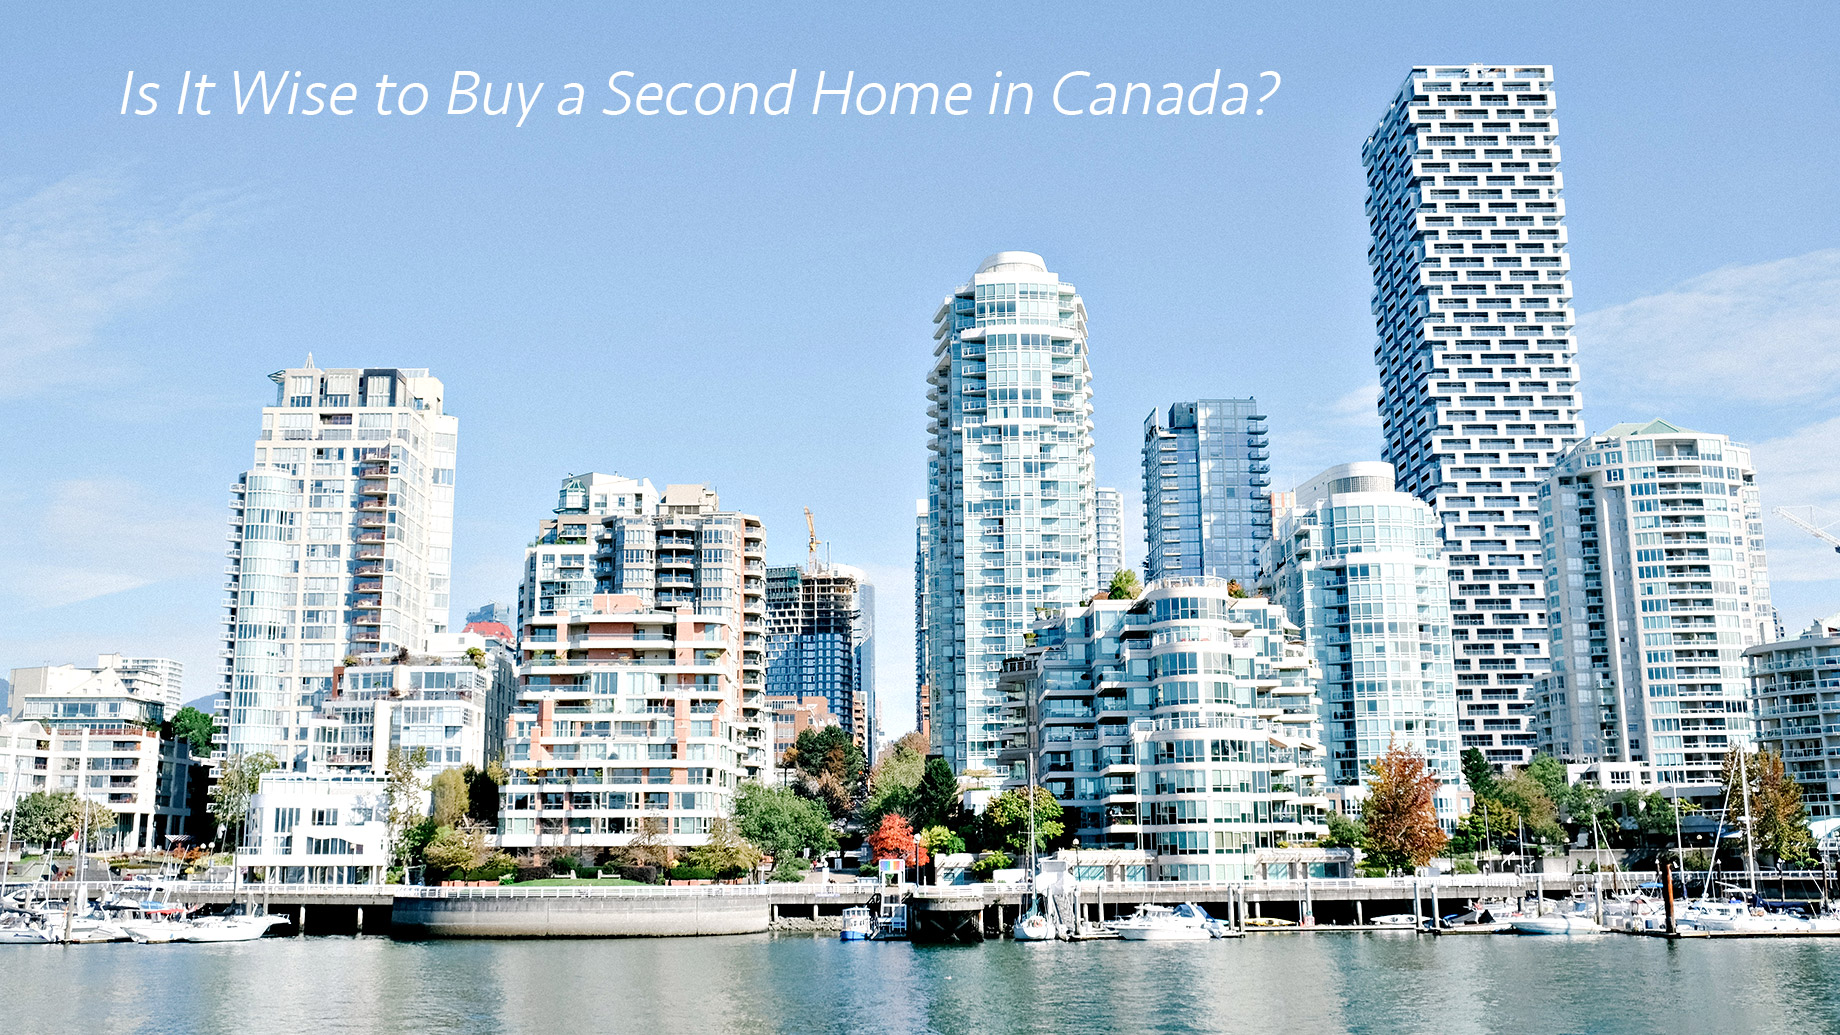 Is It Wise to Buy a Second Home in Canada?